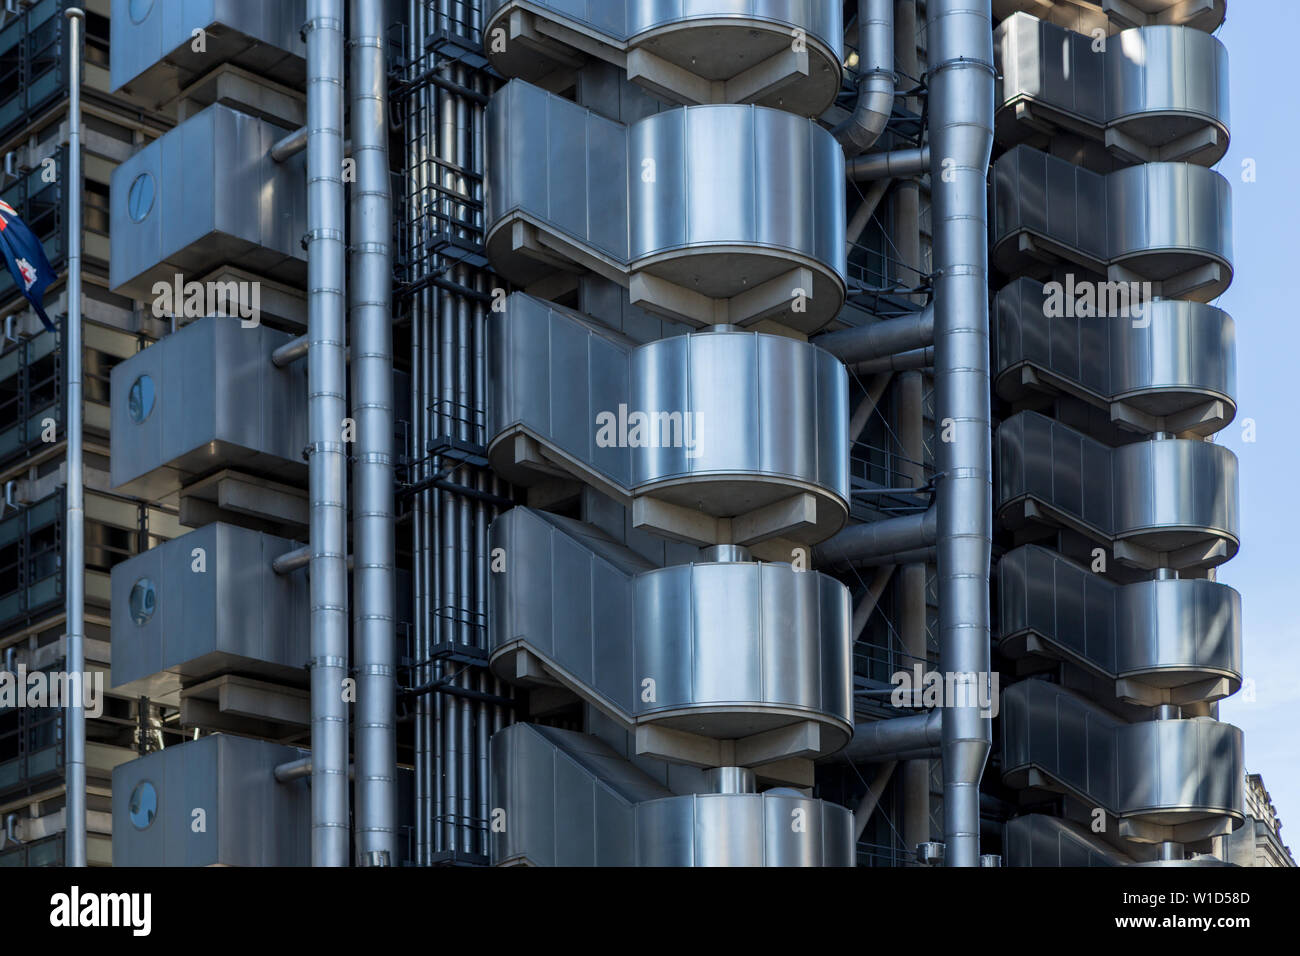 The Lloyd's building in London's main finalcial district, the City. The building is a leading example of radical Bowellism architecture. Stock Photo